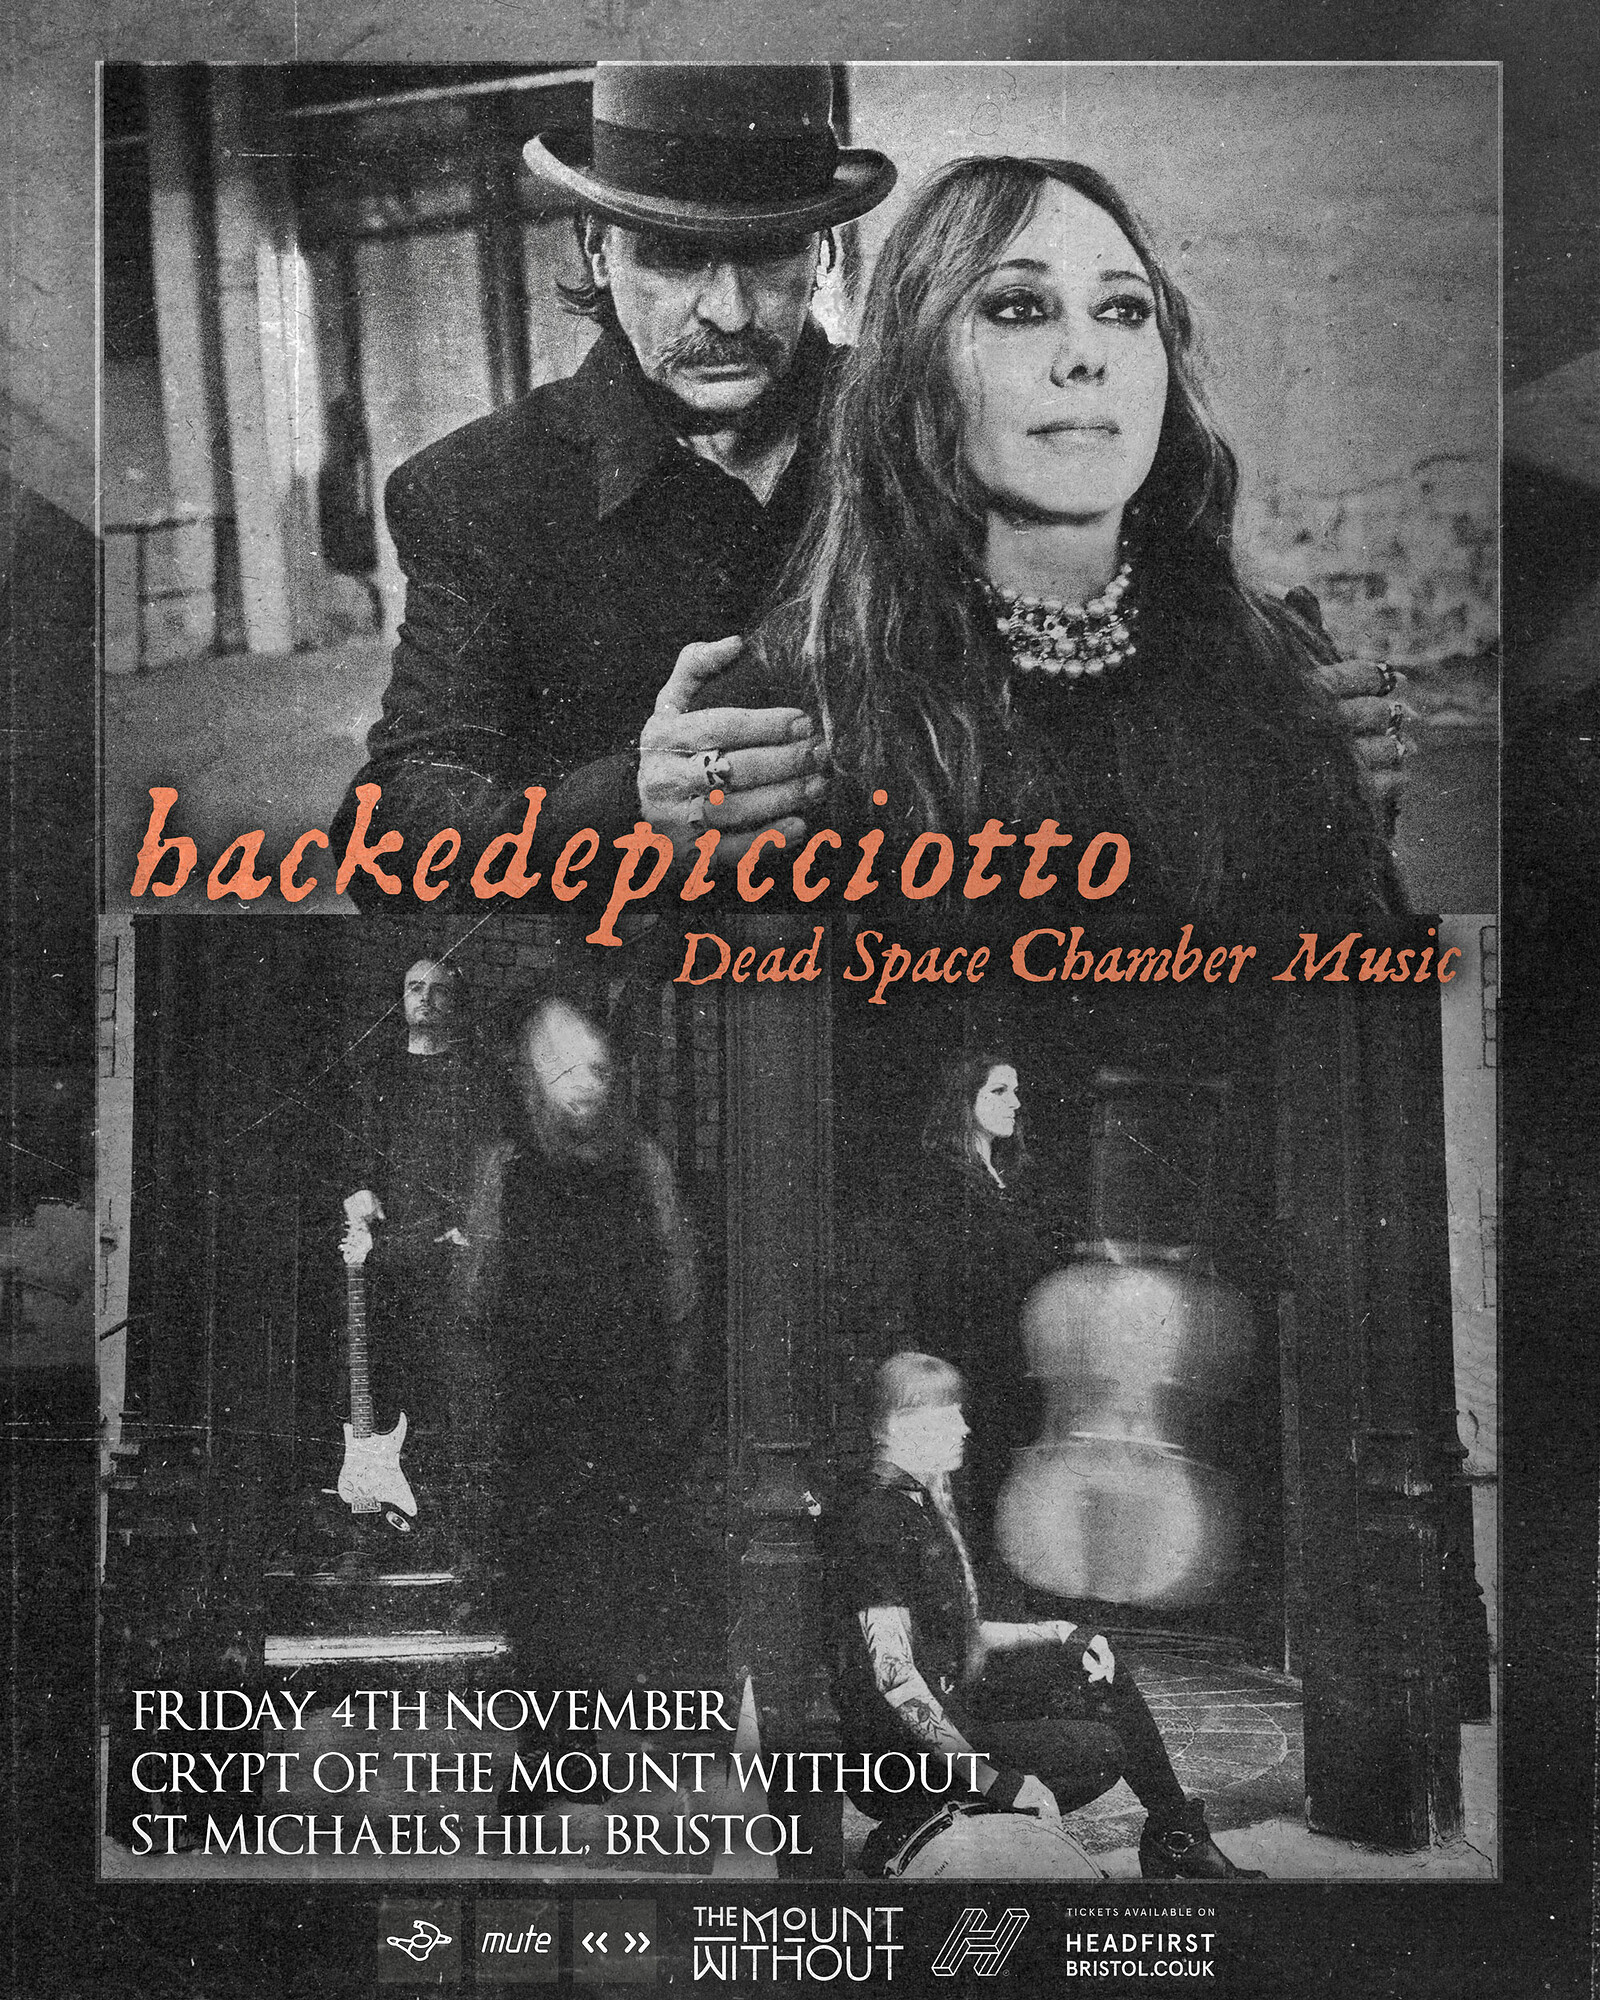 hackedepicciotto + Dead Space Chamber Music at Crypt of The Mount Without, St Michaels Hill